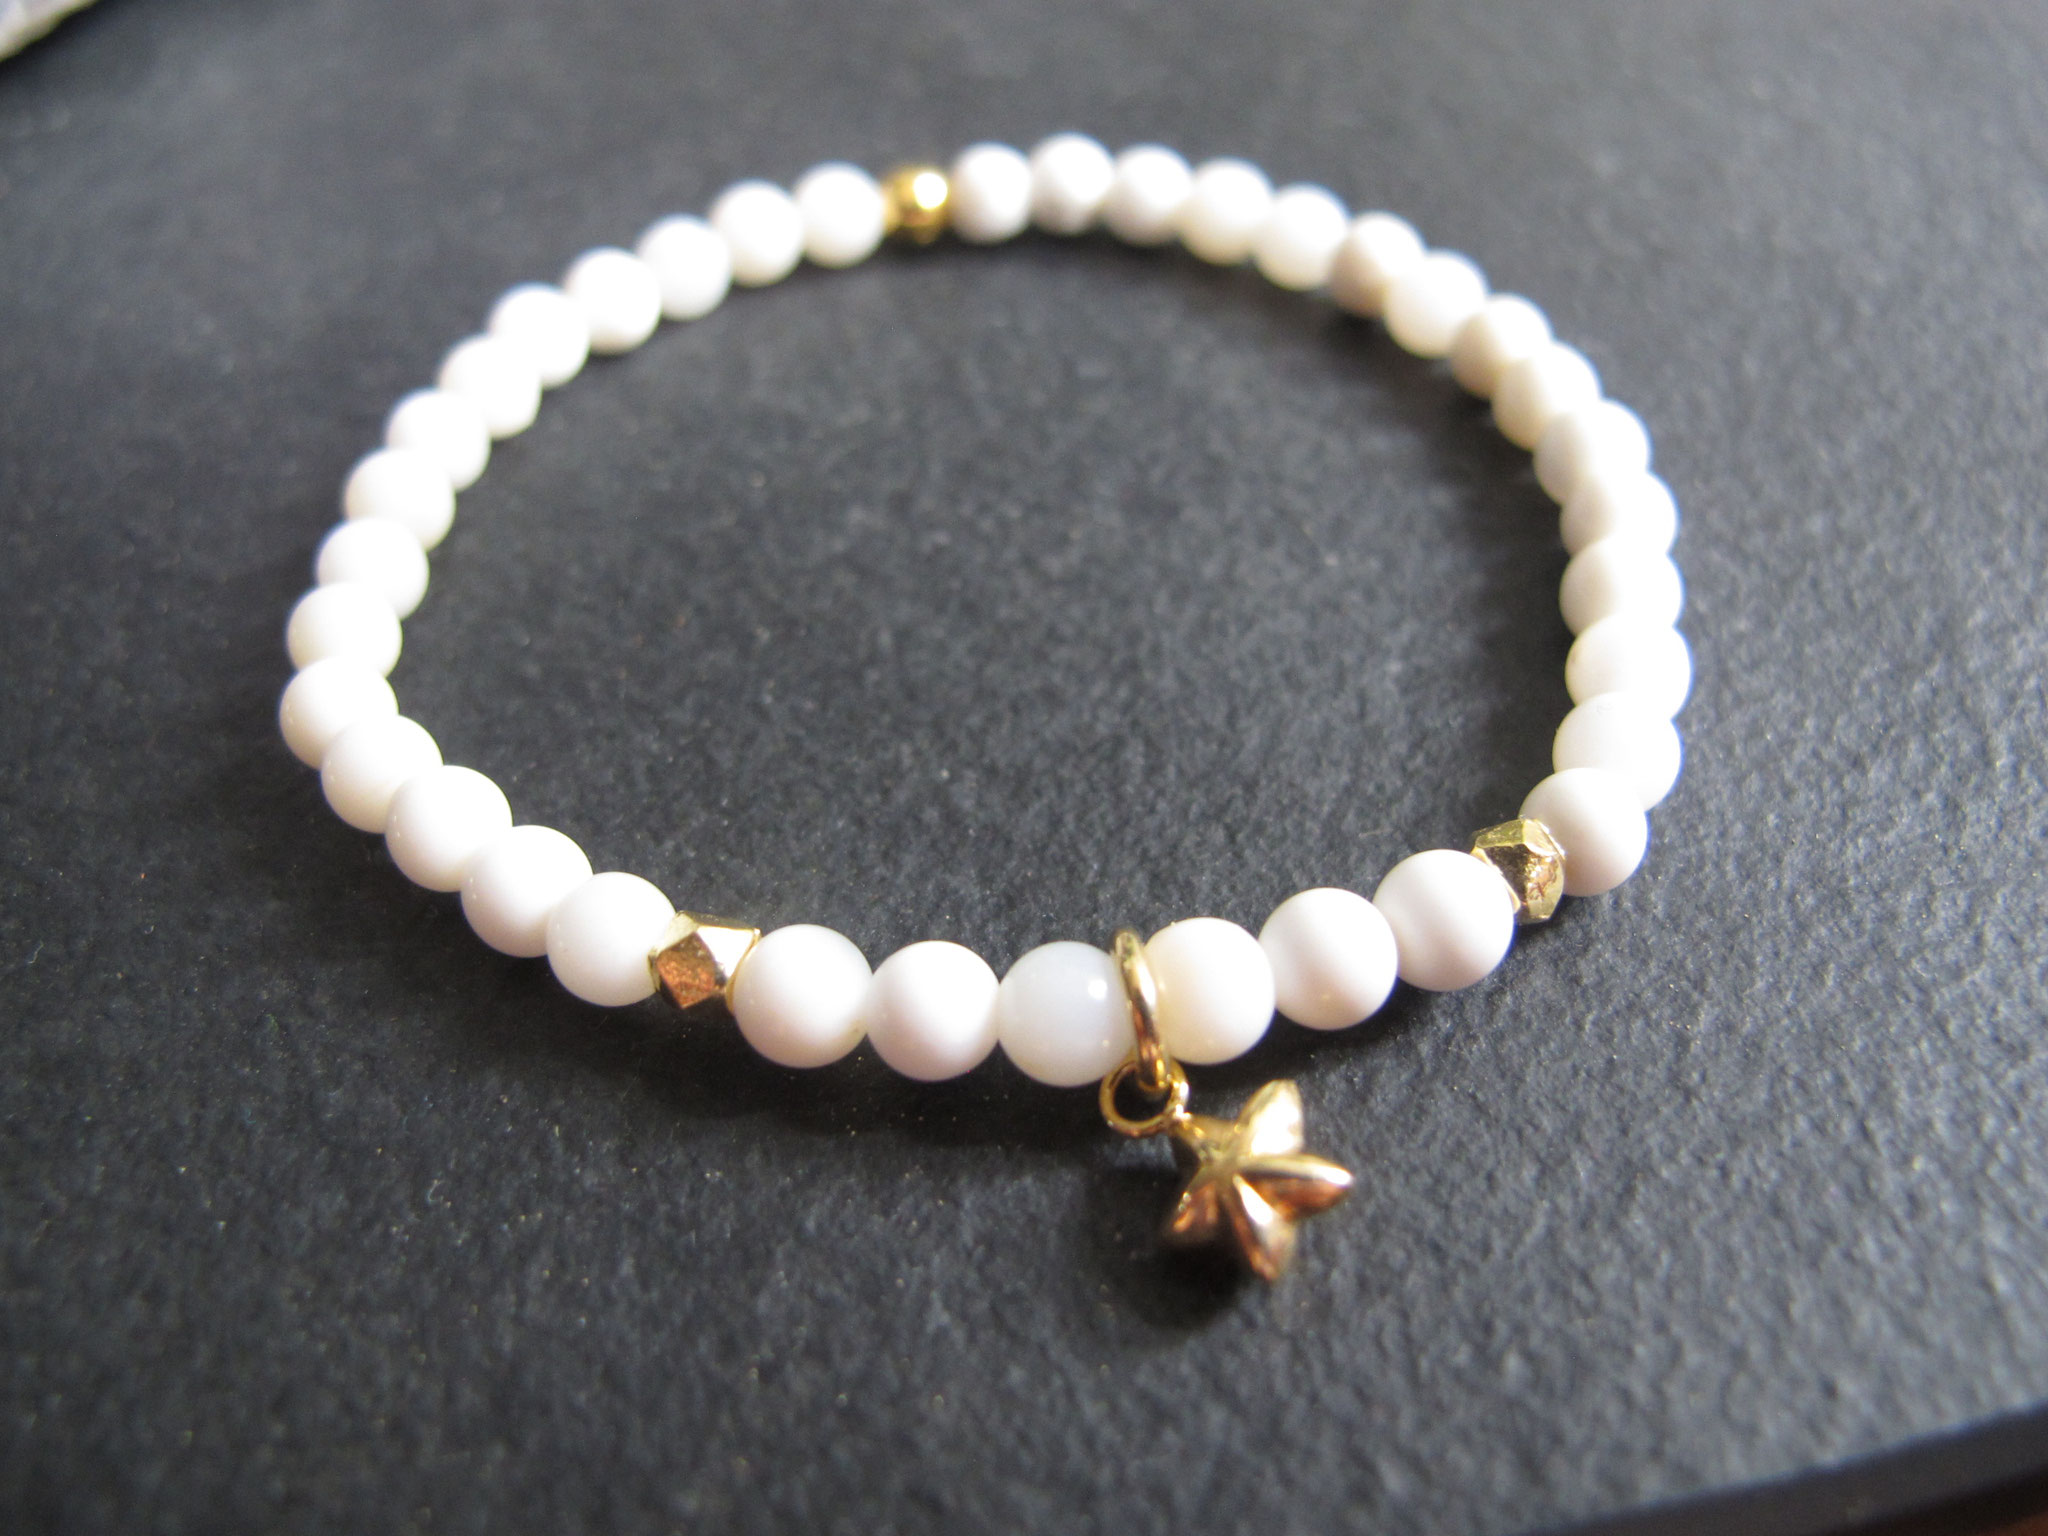 White jade with gold details and star pendant